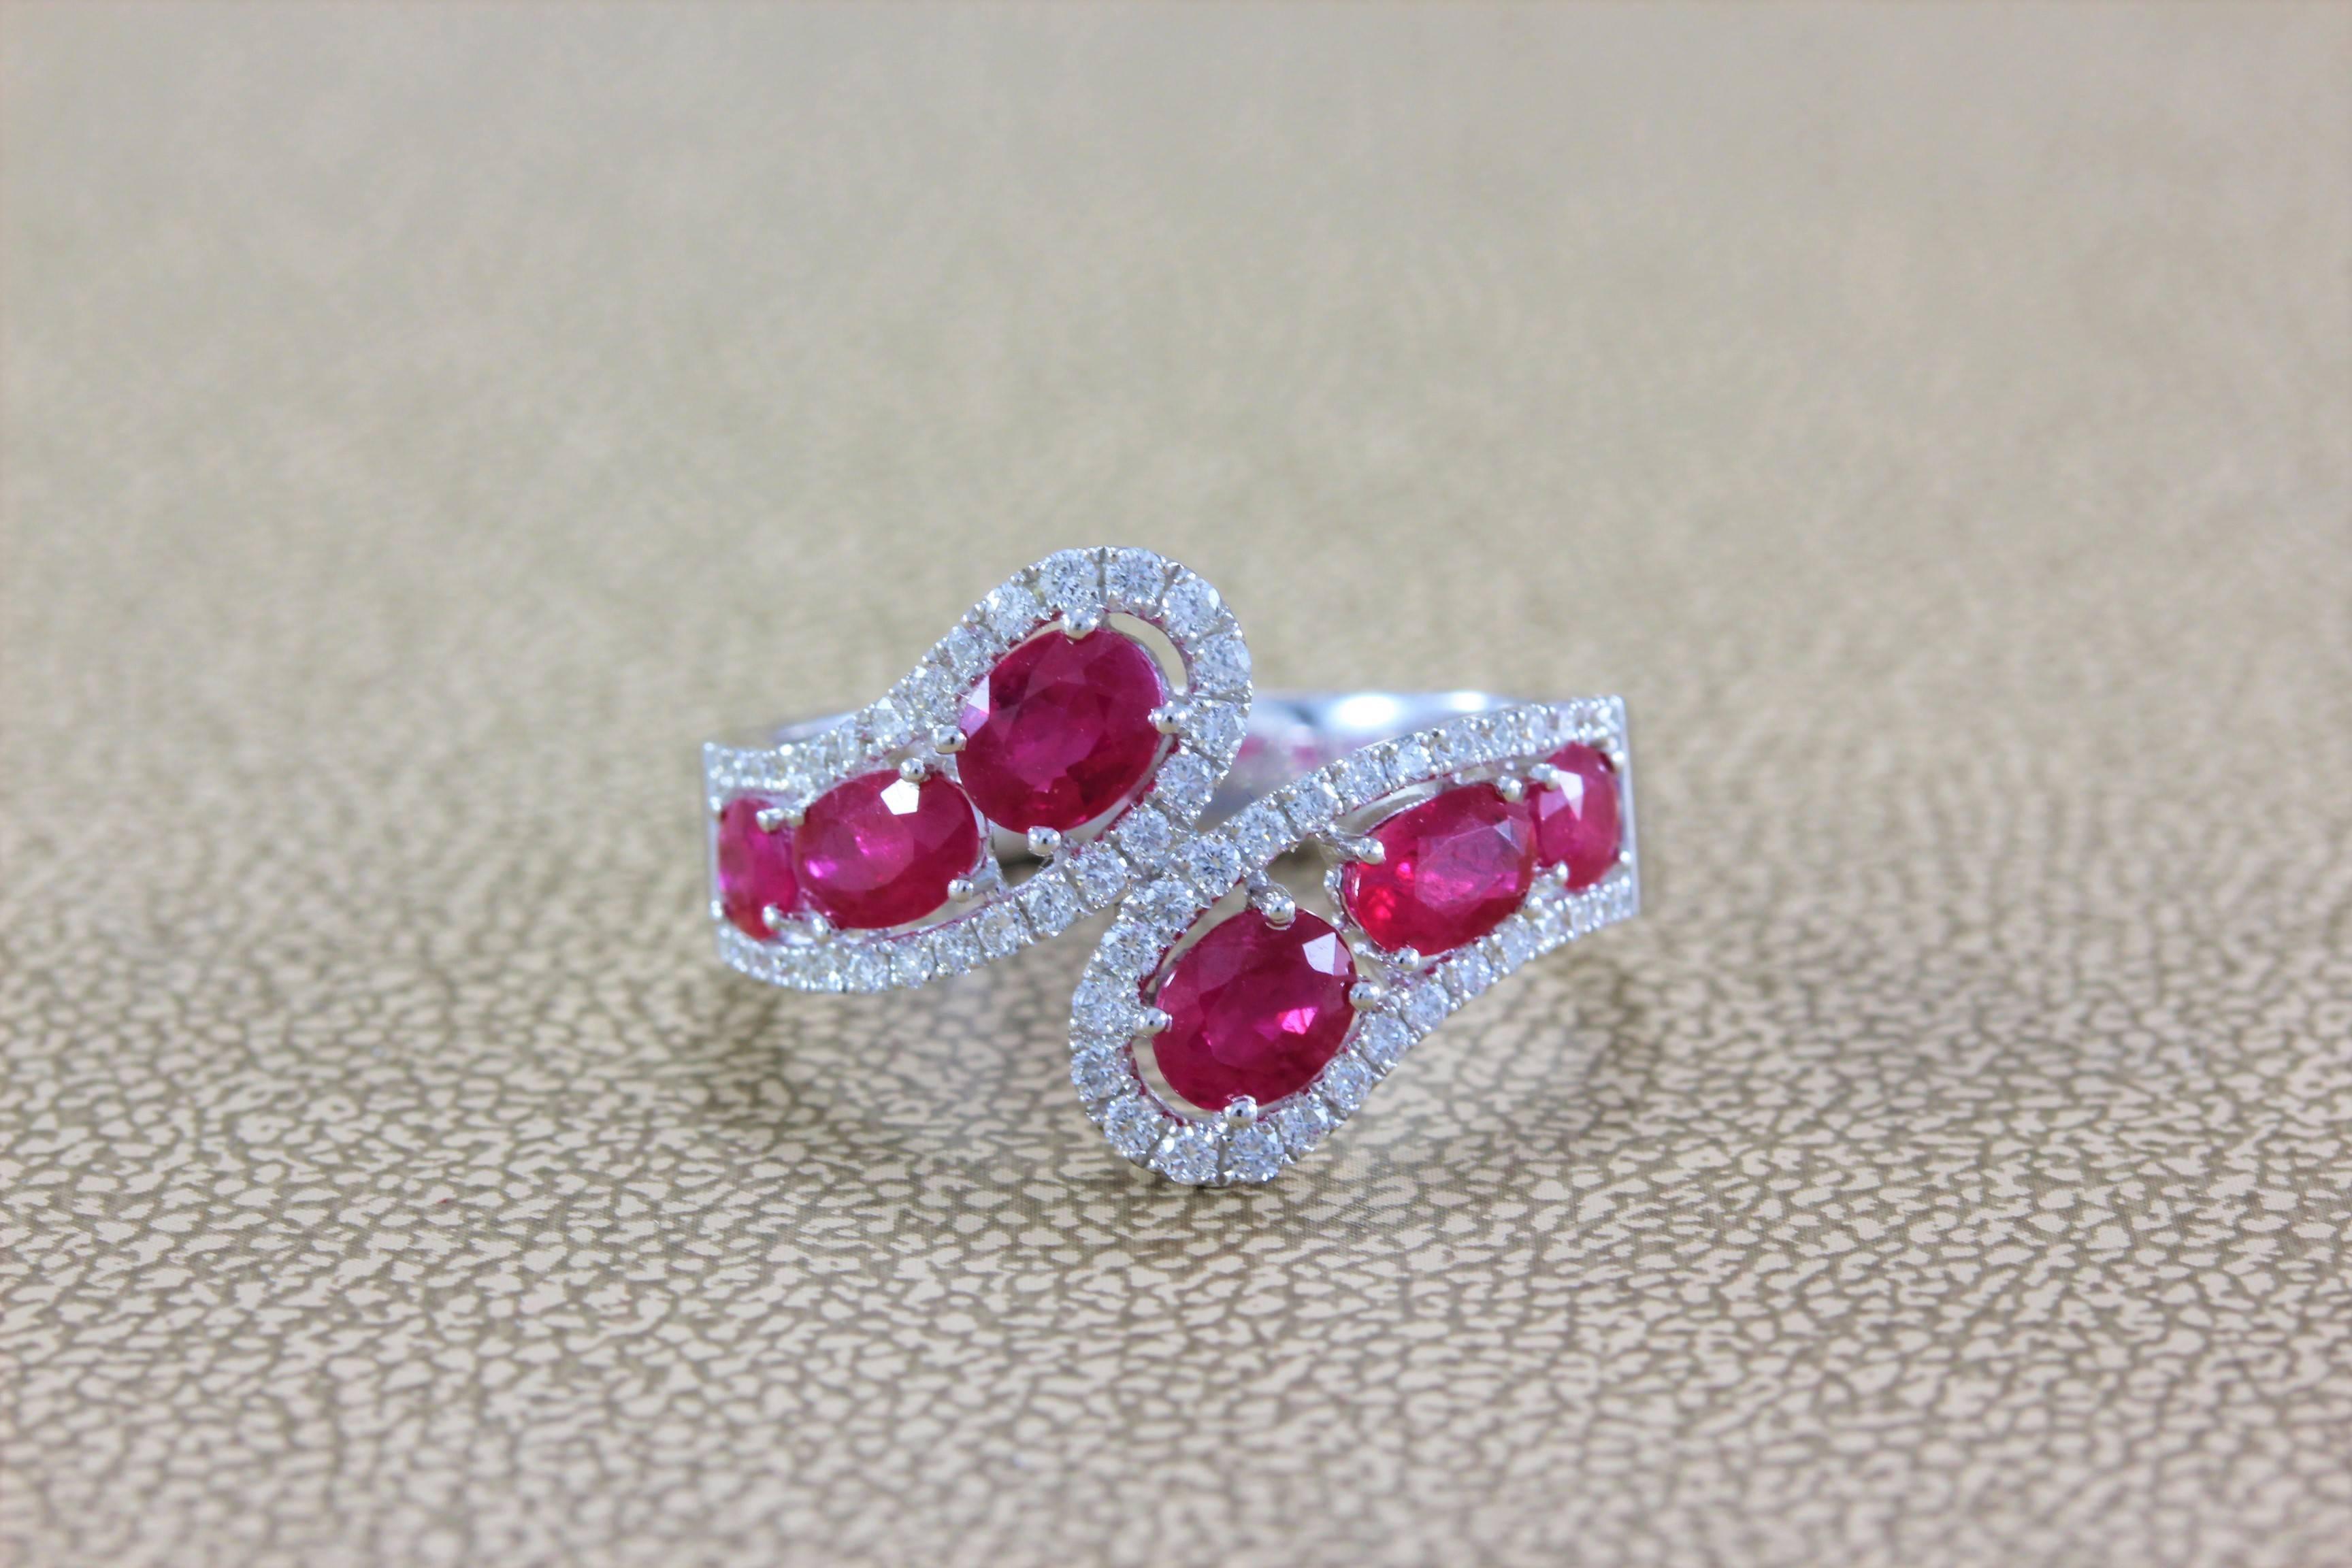 A sleek and sexy bypass ring featuring 1.87 carats of deeply saturated vivid red ruby accented by full-cut VS colorless diamonds all set in 18K white gold. 

Simple yet unique, the ring can be worn every day or dressed up for an evening out. 

Size